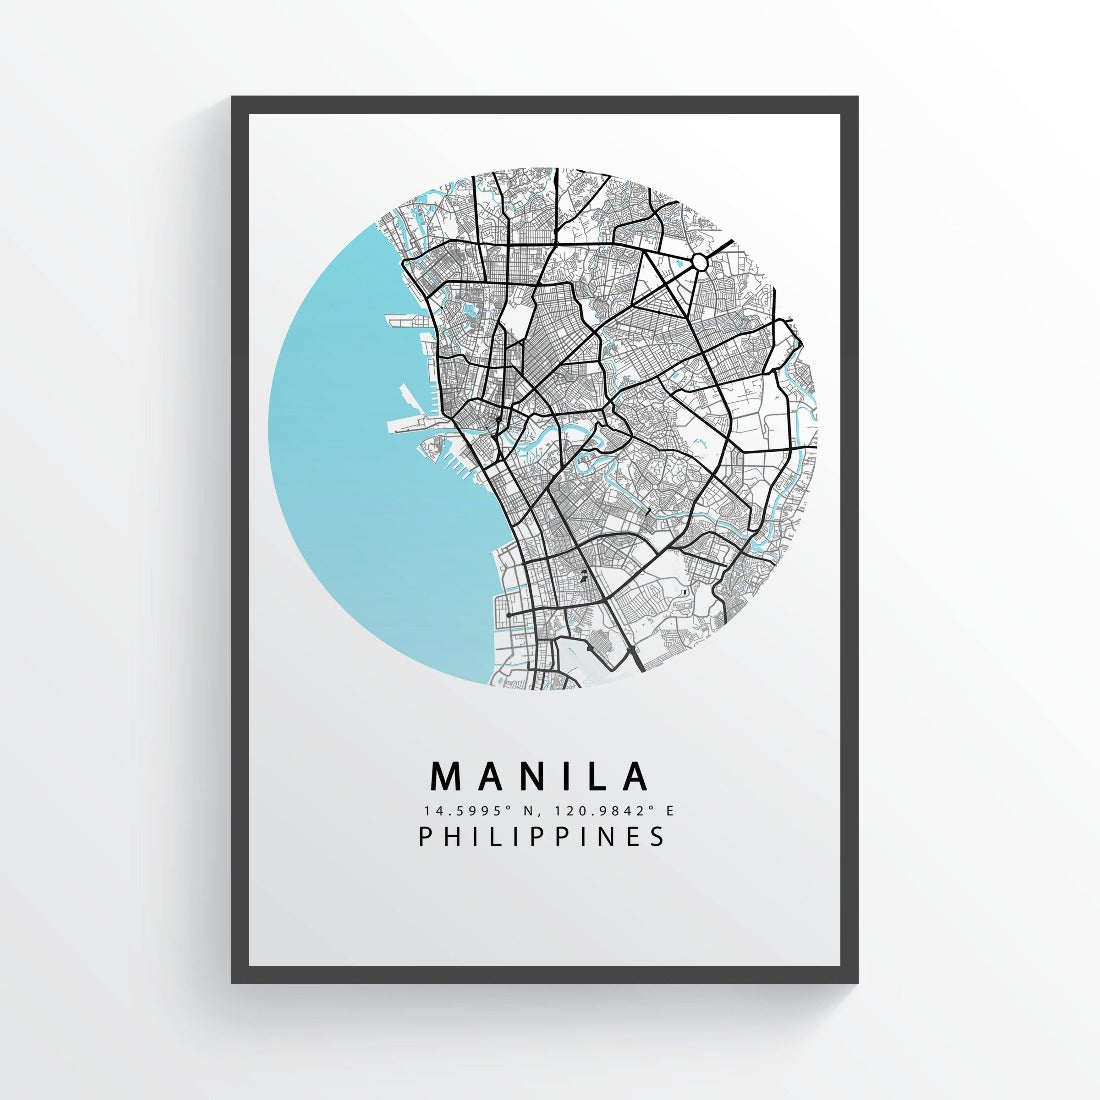 The perfect print for your wanderlust soul. If there's one thing that gets us excited, it's exploring new cities. Whether you're a seasoned traveler or just starting to see the world, this print is the perfect addition to your walls. With a beautiful illustration of Manila's streets, this print is the perfect way to remember your travels.